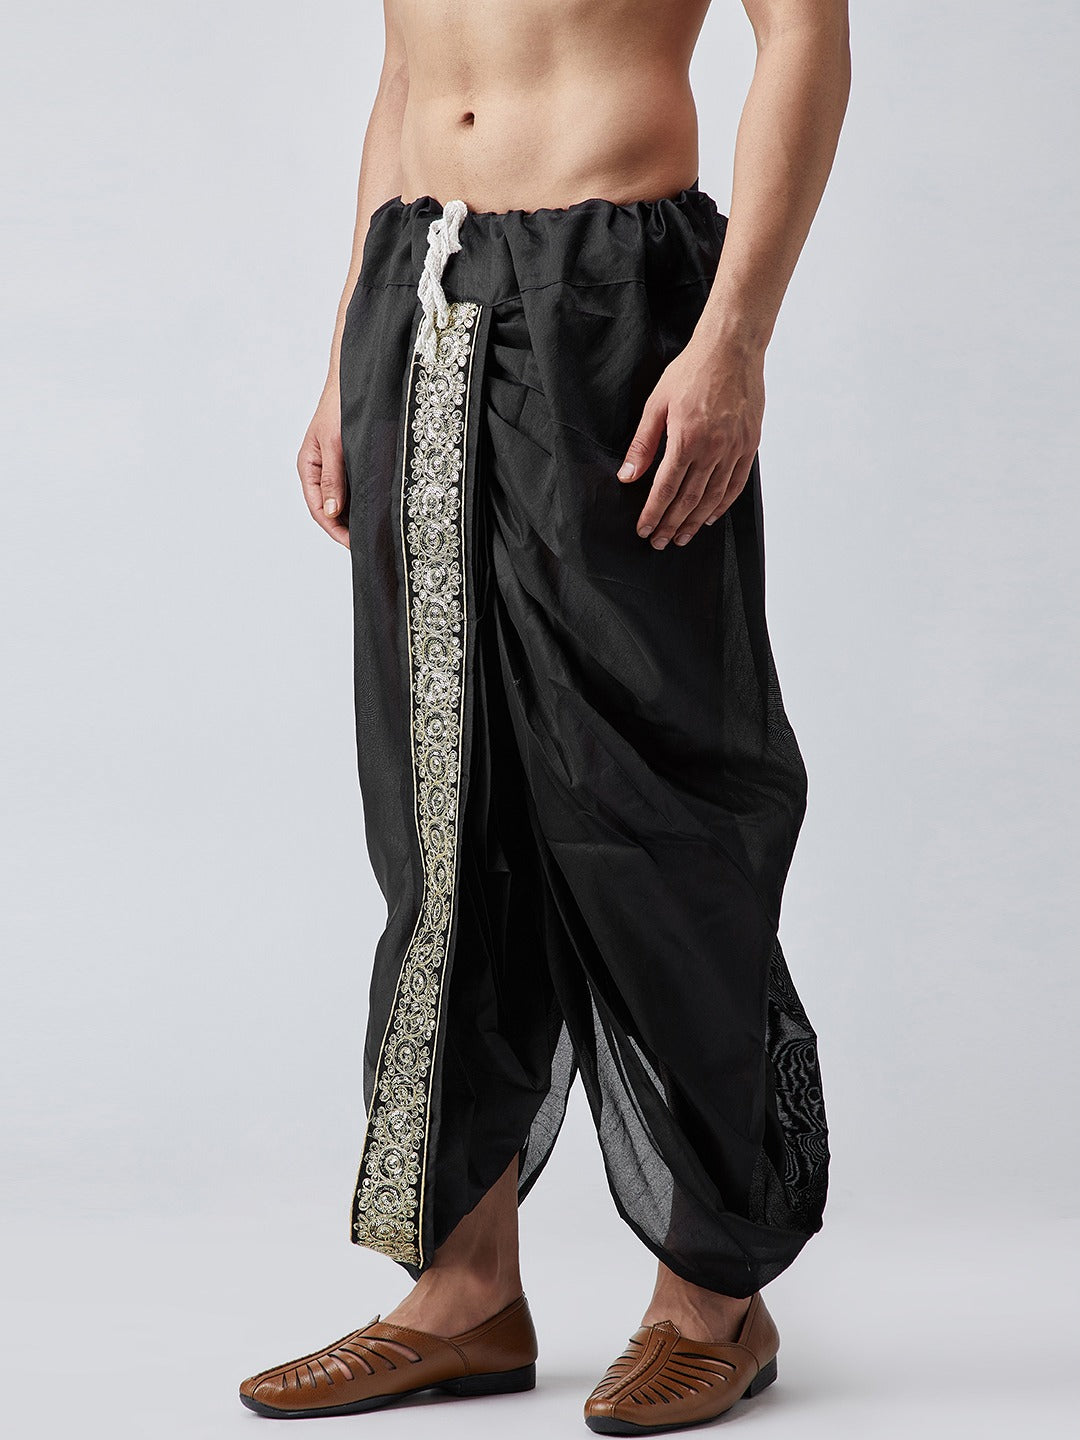 Black Embroidered Dhoti Pants Indian Clothing in Denver, CO, Aurora, CO, Boulder, CO, Fort Collins, CO, Colorado Springs, CO, Parker, CO, Highlands Ranch, CO, Cherry Creek, CO, Centennial, CO, and Longmont, CO. NATIONWIDE SHIPPING USA- India Fashion X